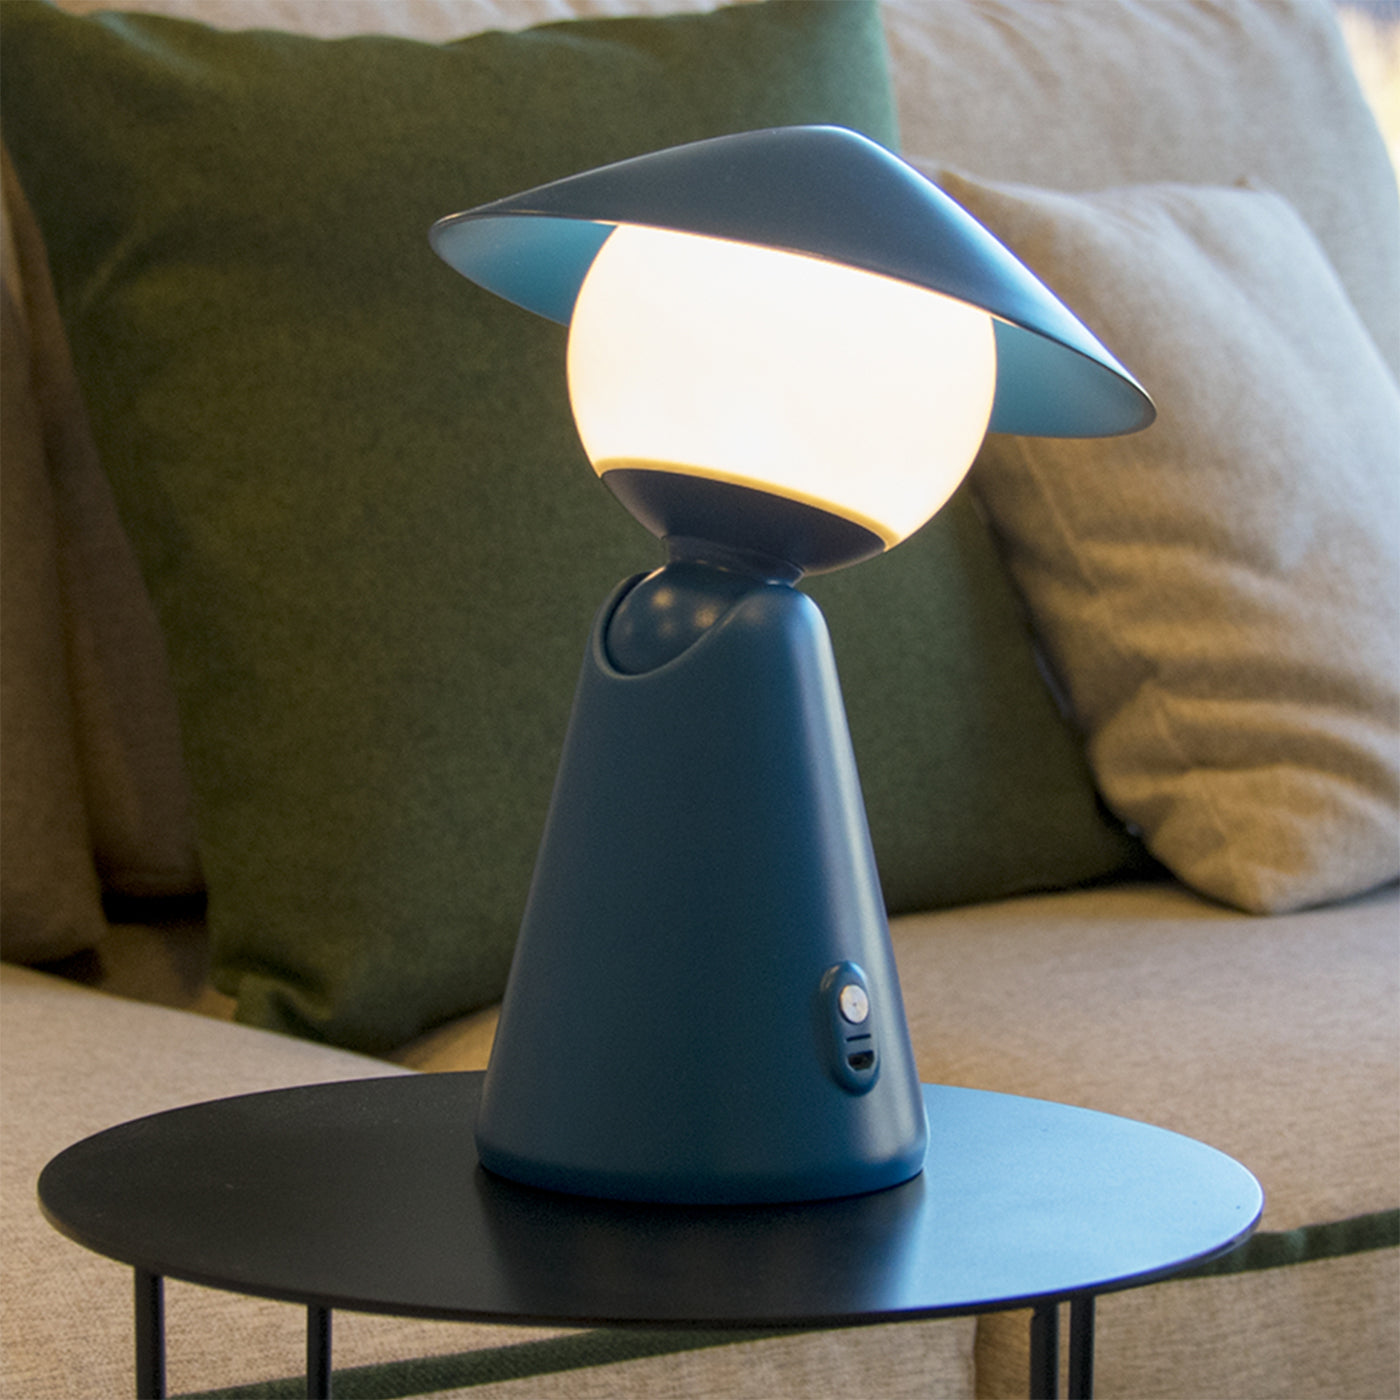 Puddy Blue Rechargeable Table Lamp by Albore Design - Alternative view 2